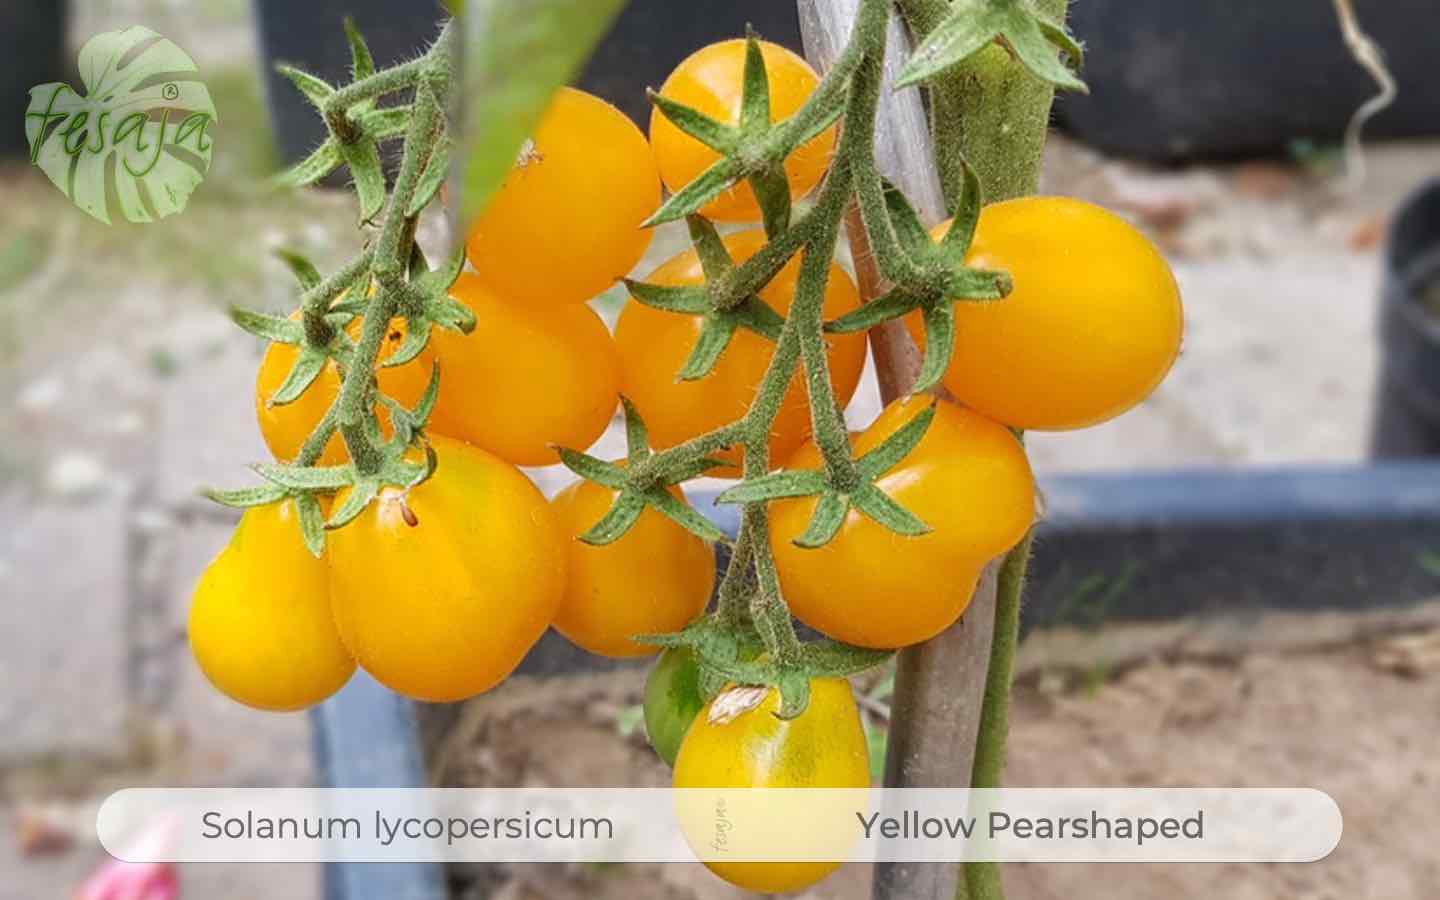 Graines de tomate yellow pearshaped insolite botanic® - graines à semer :  Graines de tomates BOTANIC potager et verger - botanic®